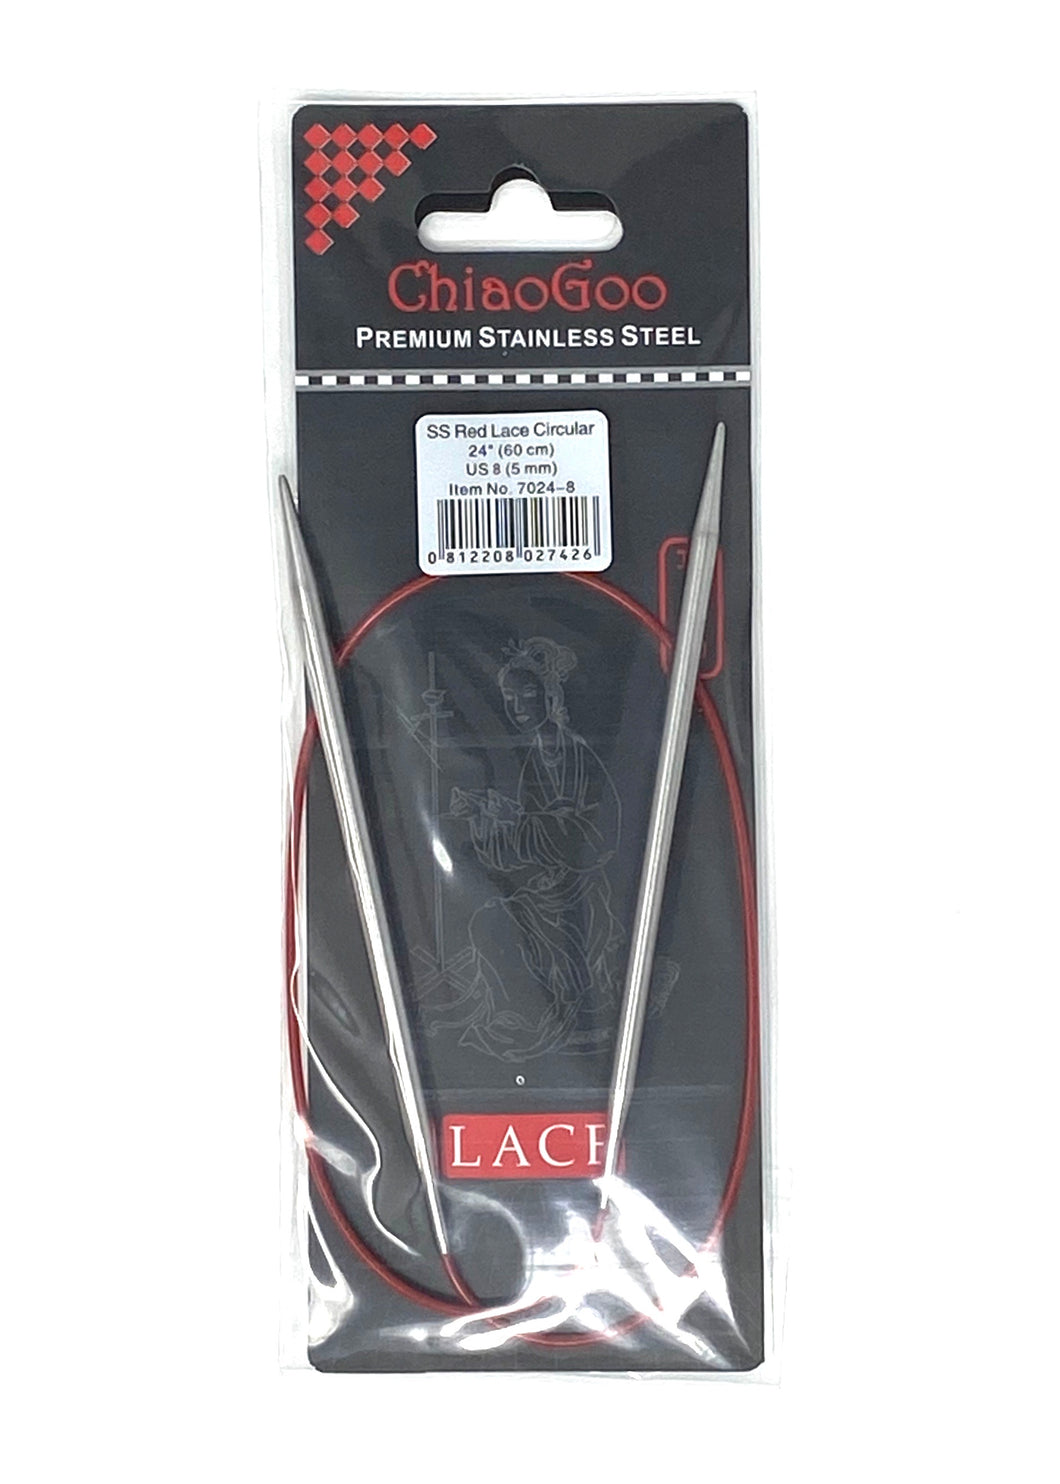 ChiaoGoo Red Lace Circular Needles - US 8 - 24 Inches